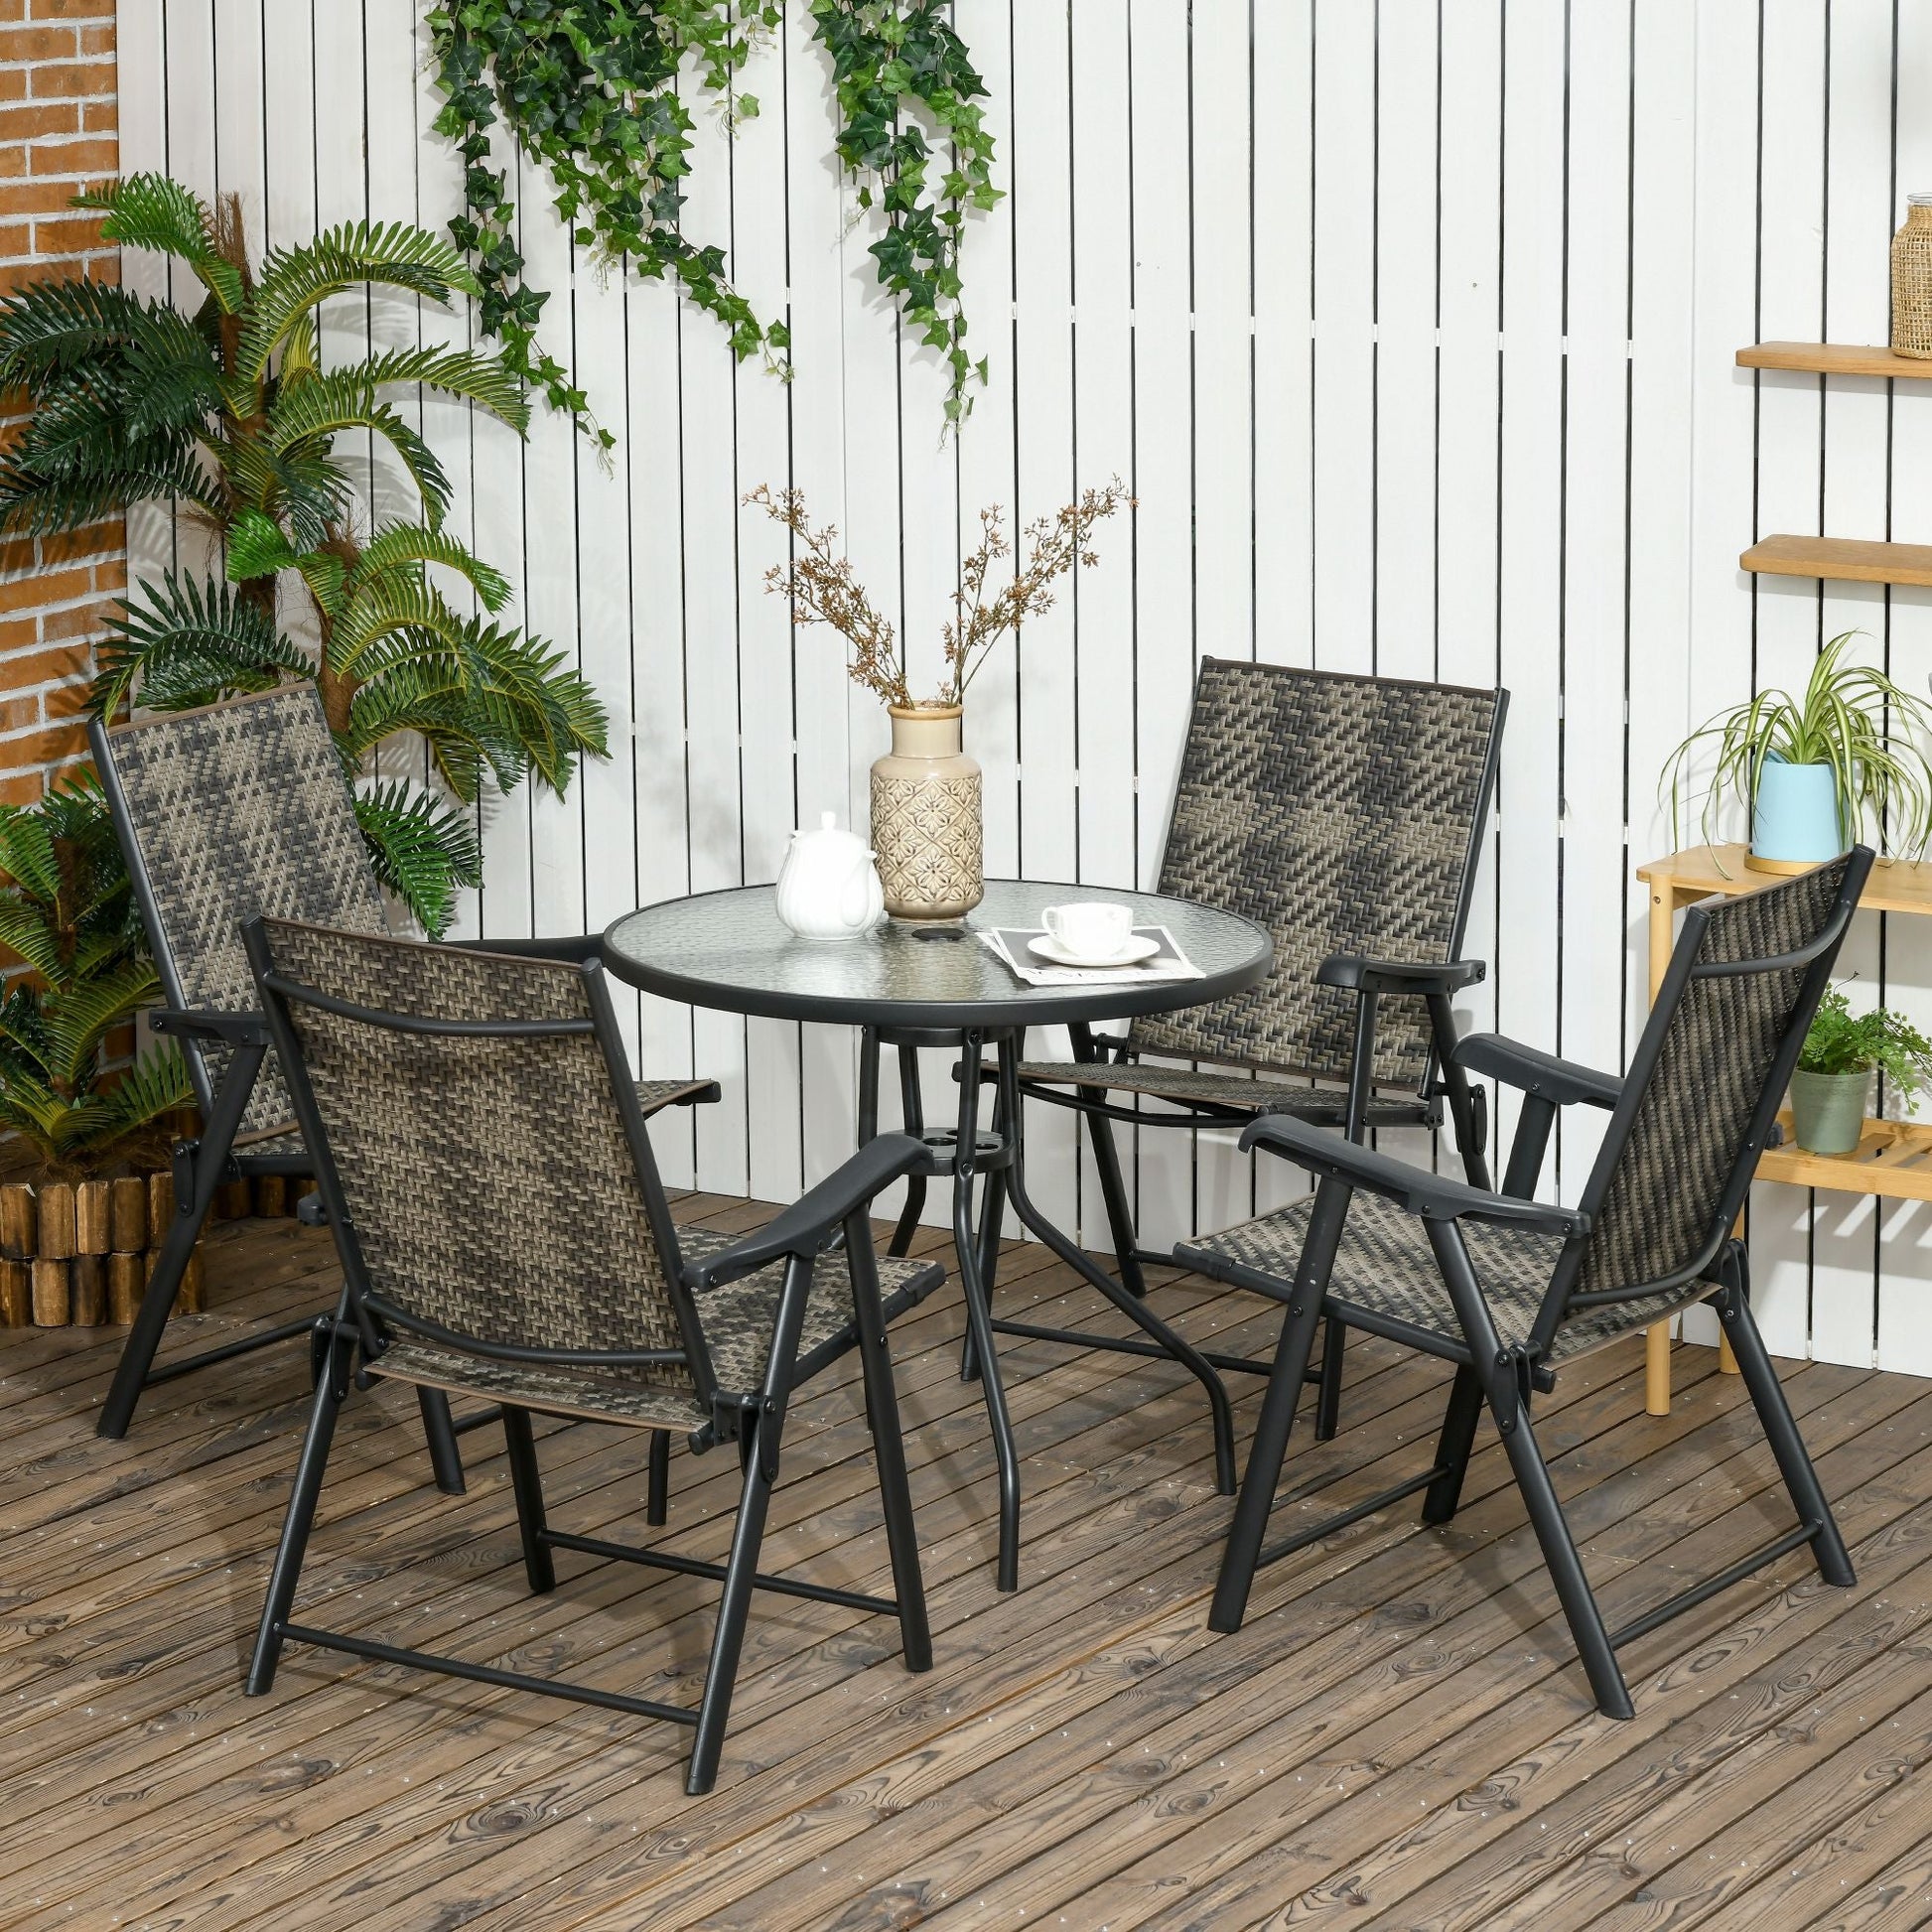 5 Pieces Wicker Patio Dining Set, Φ31.5" Round Glass Top Garden Dining Table with Umbrella Hole, Outdoor PE Rattan Folding Armchair for Outdoors, Camping, Mixed Gray at Gallery Canada